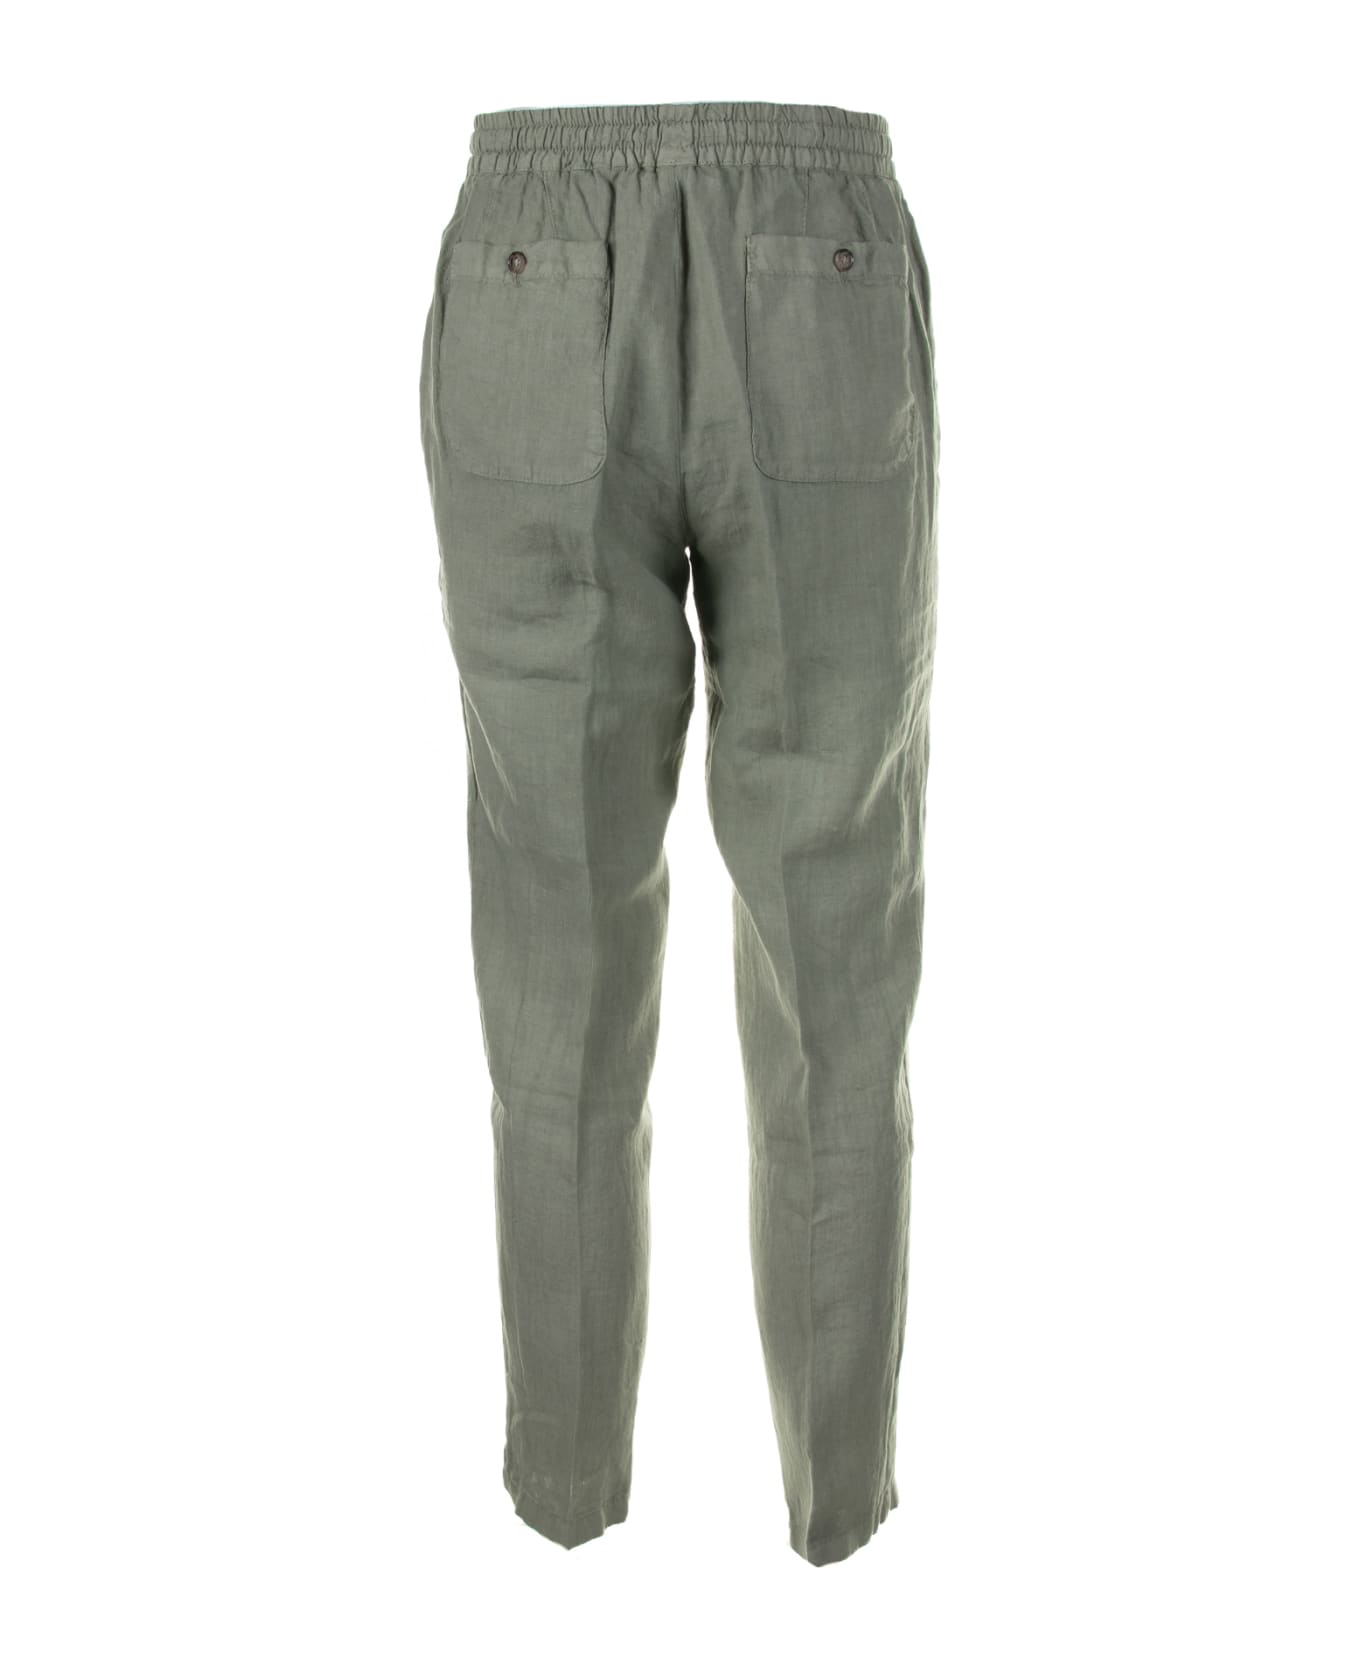 Altea Green Linen Trousers With Drawstring - VERDE